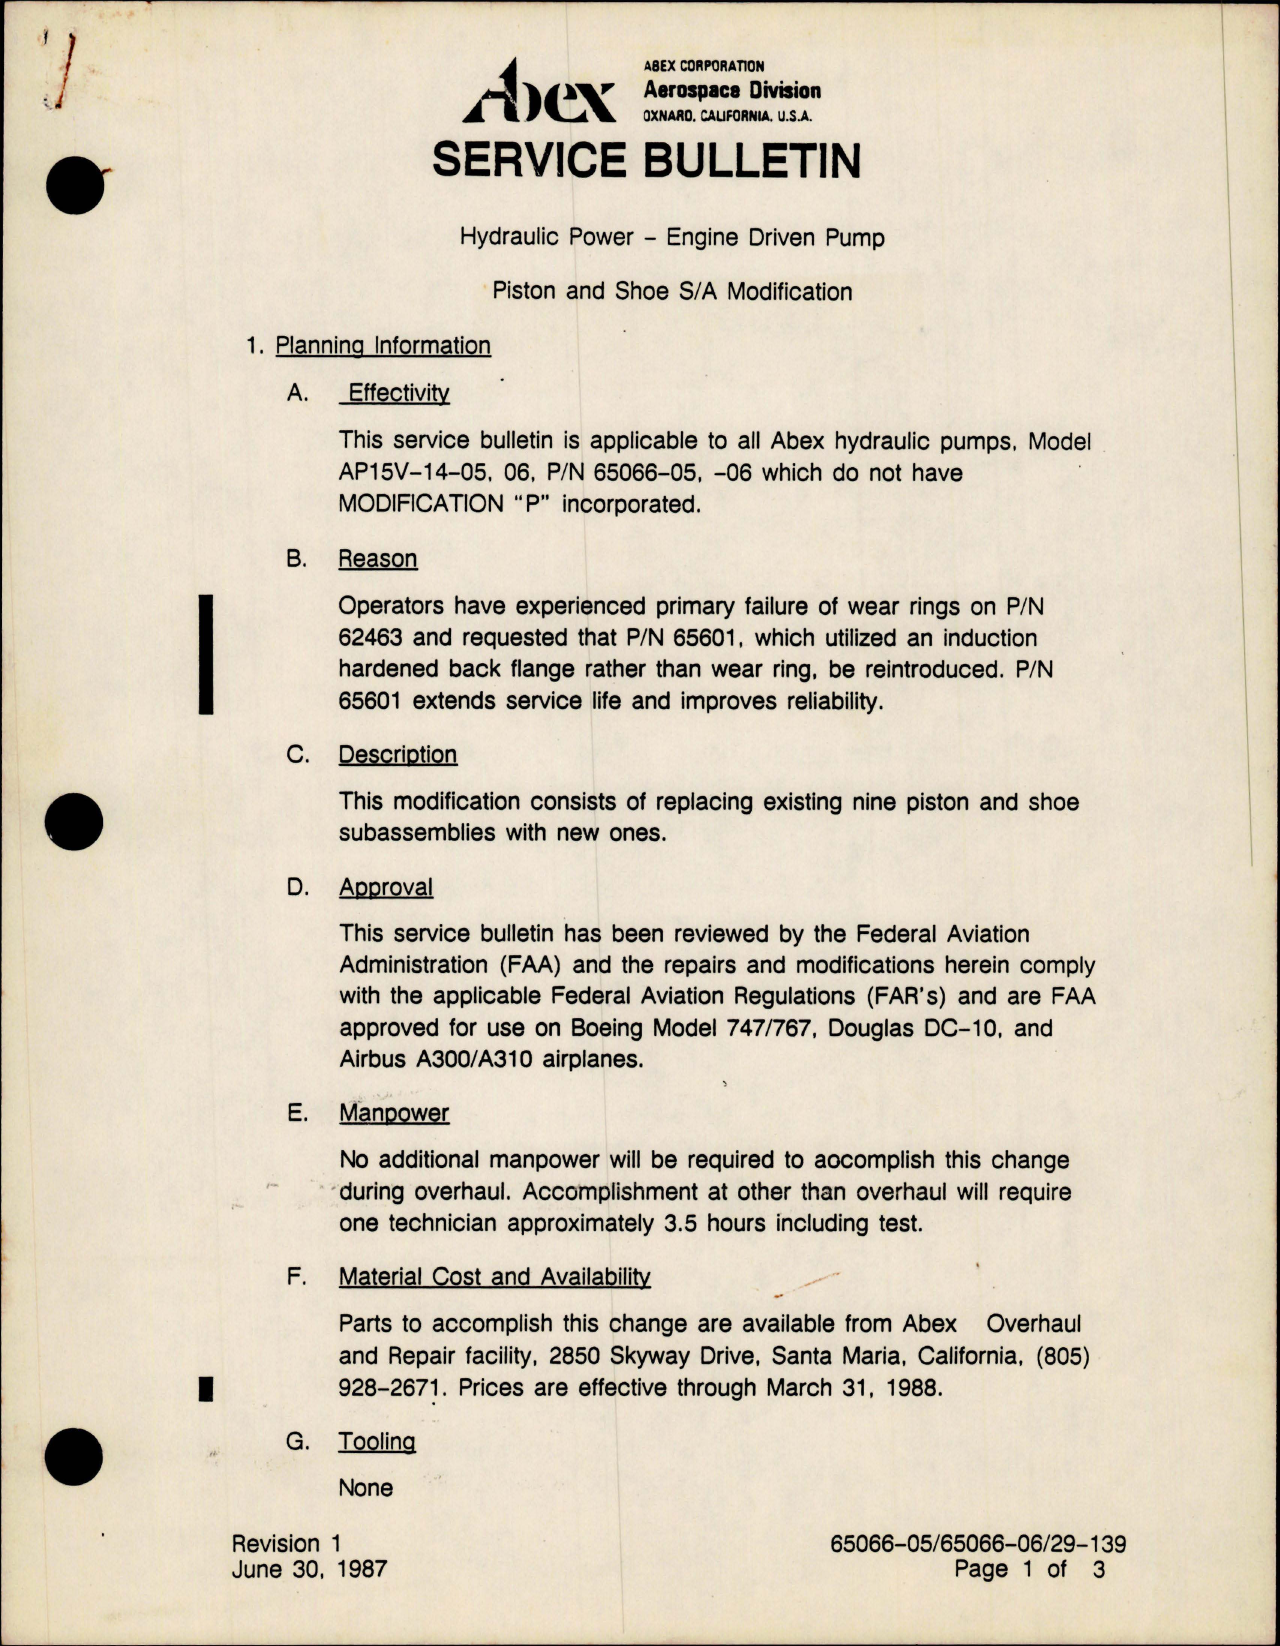 Sample page 1 from AirCorps Library document: Hydraulic Power - Engine Driven Pump - Piston and Shoe Modification - Model AP15V-14-05 and AP15V-14-06 